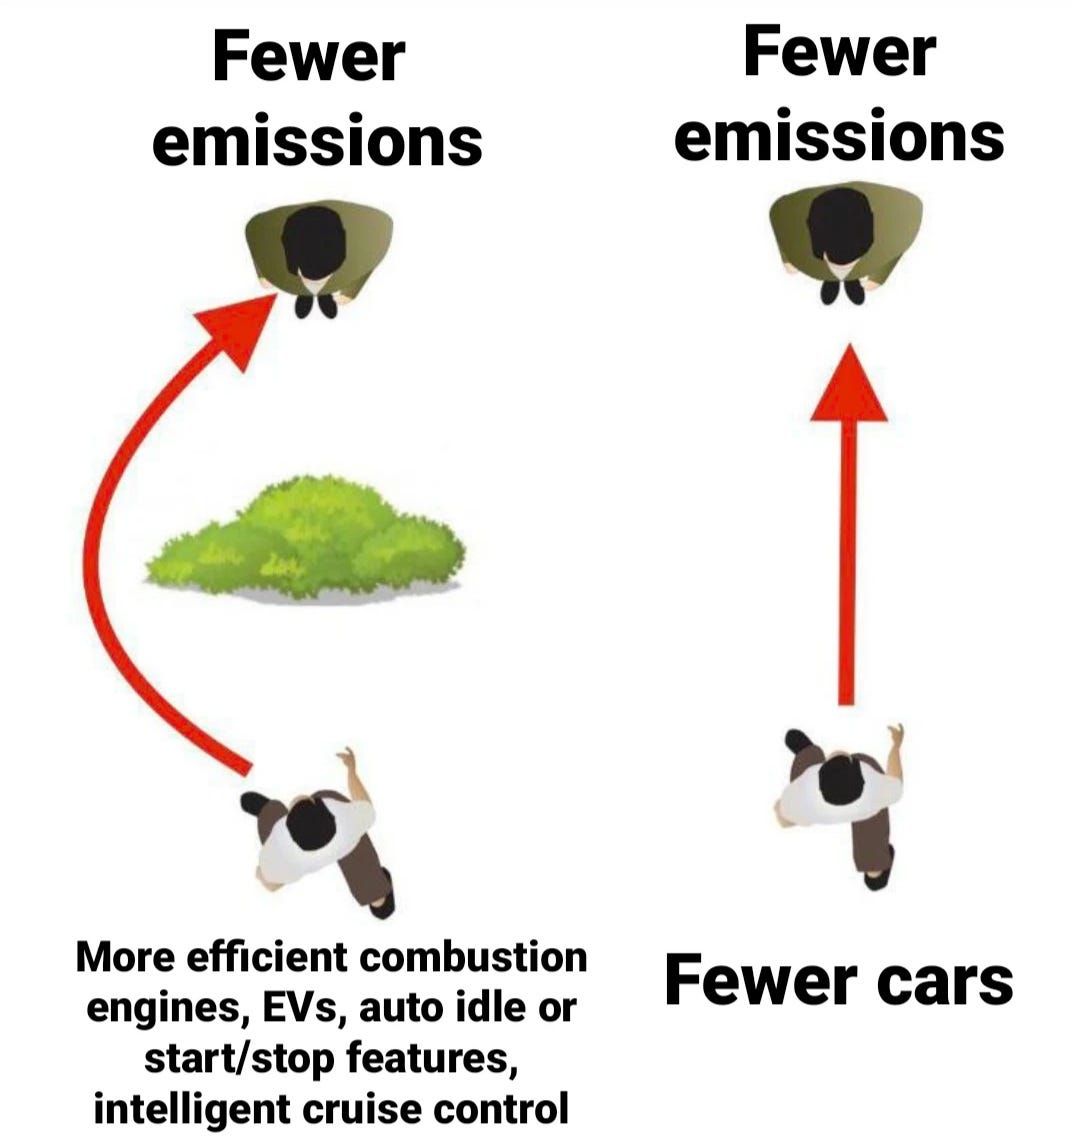 a more direct way of reaching fewer emissions would be fewer cars